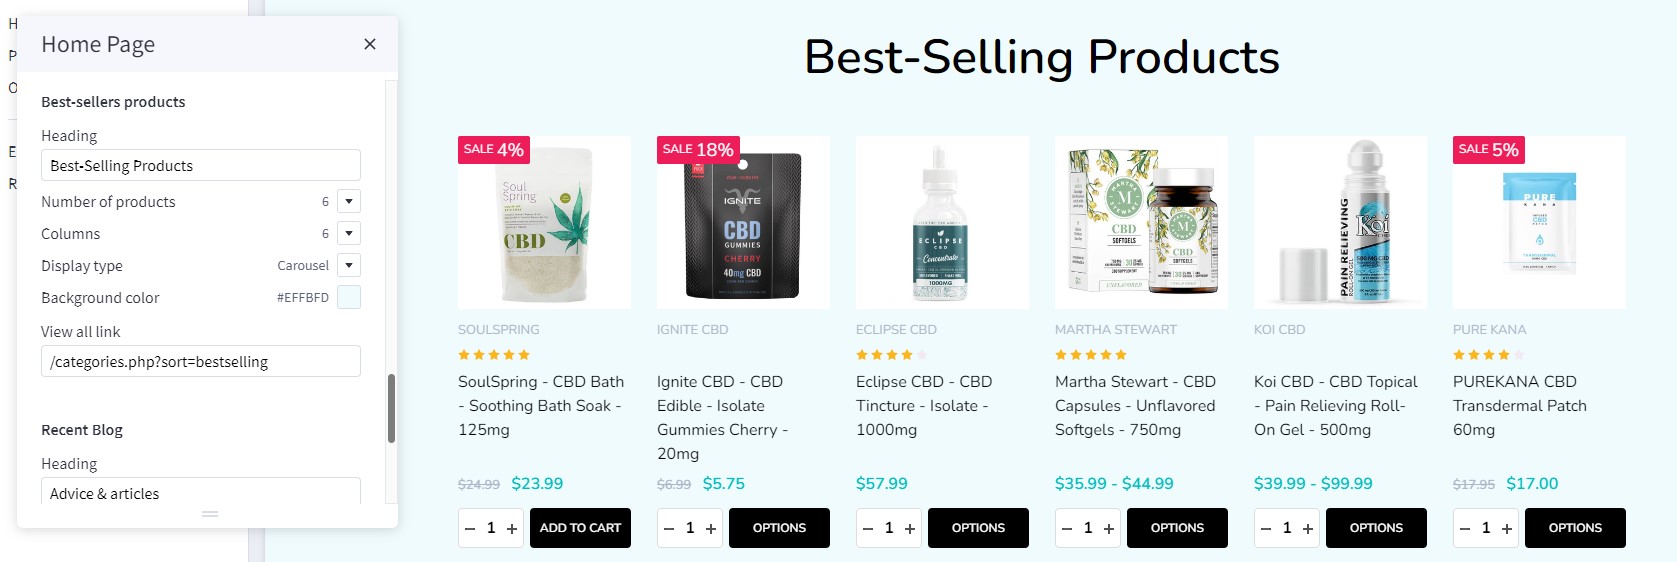 bestselling-products